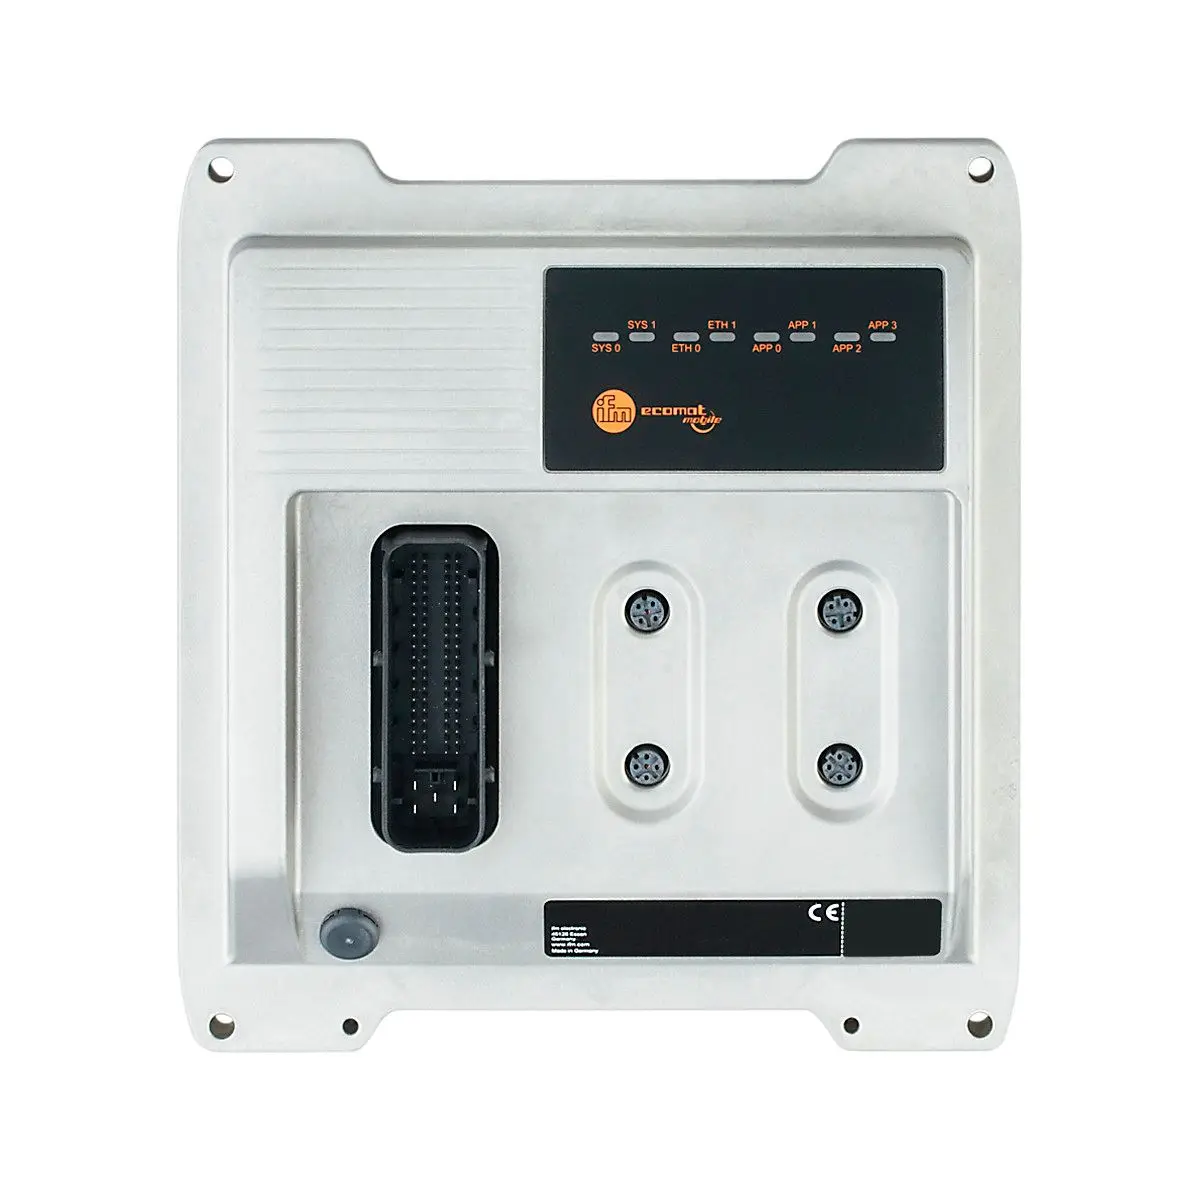 Original IFM CR711S ecomatController/98 is suitable for mobile vehicles construction machinery